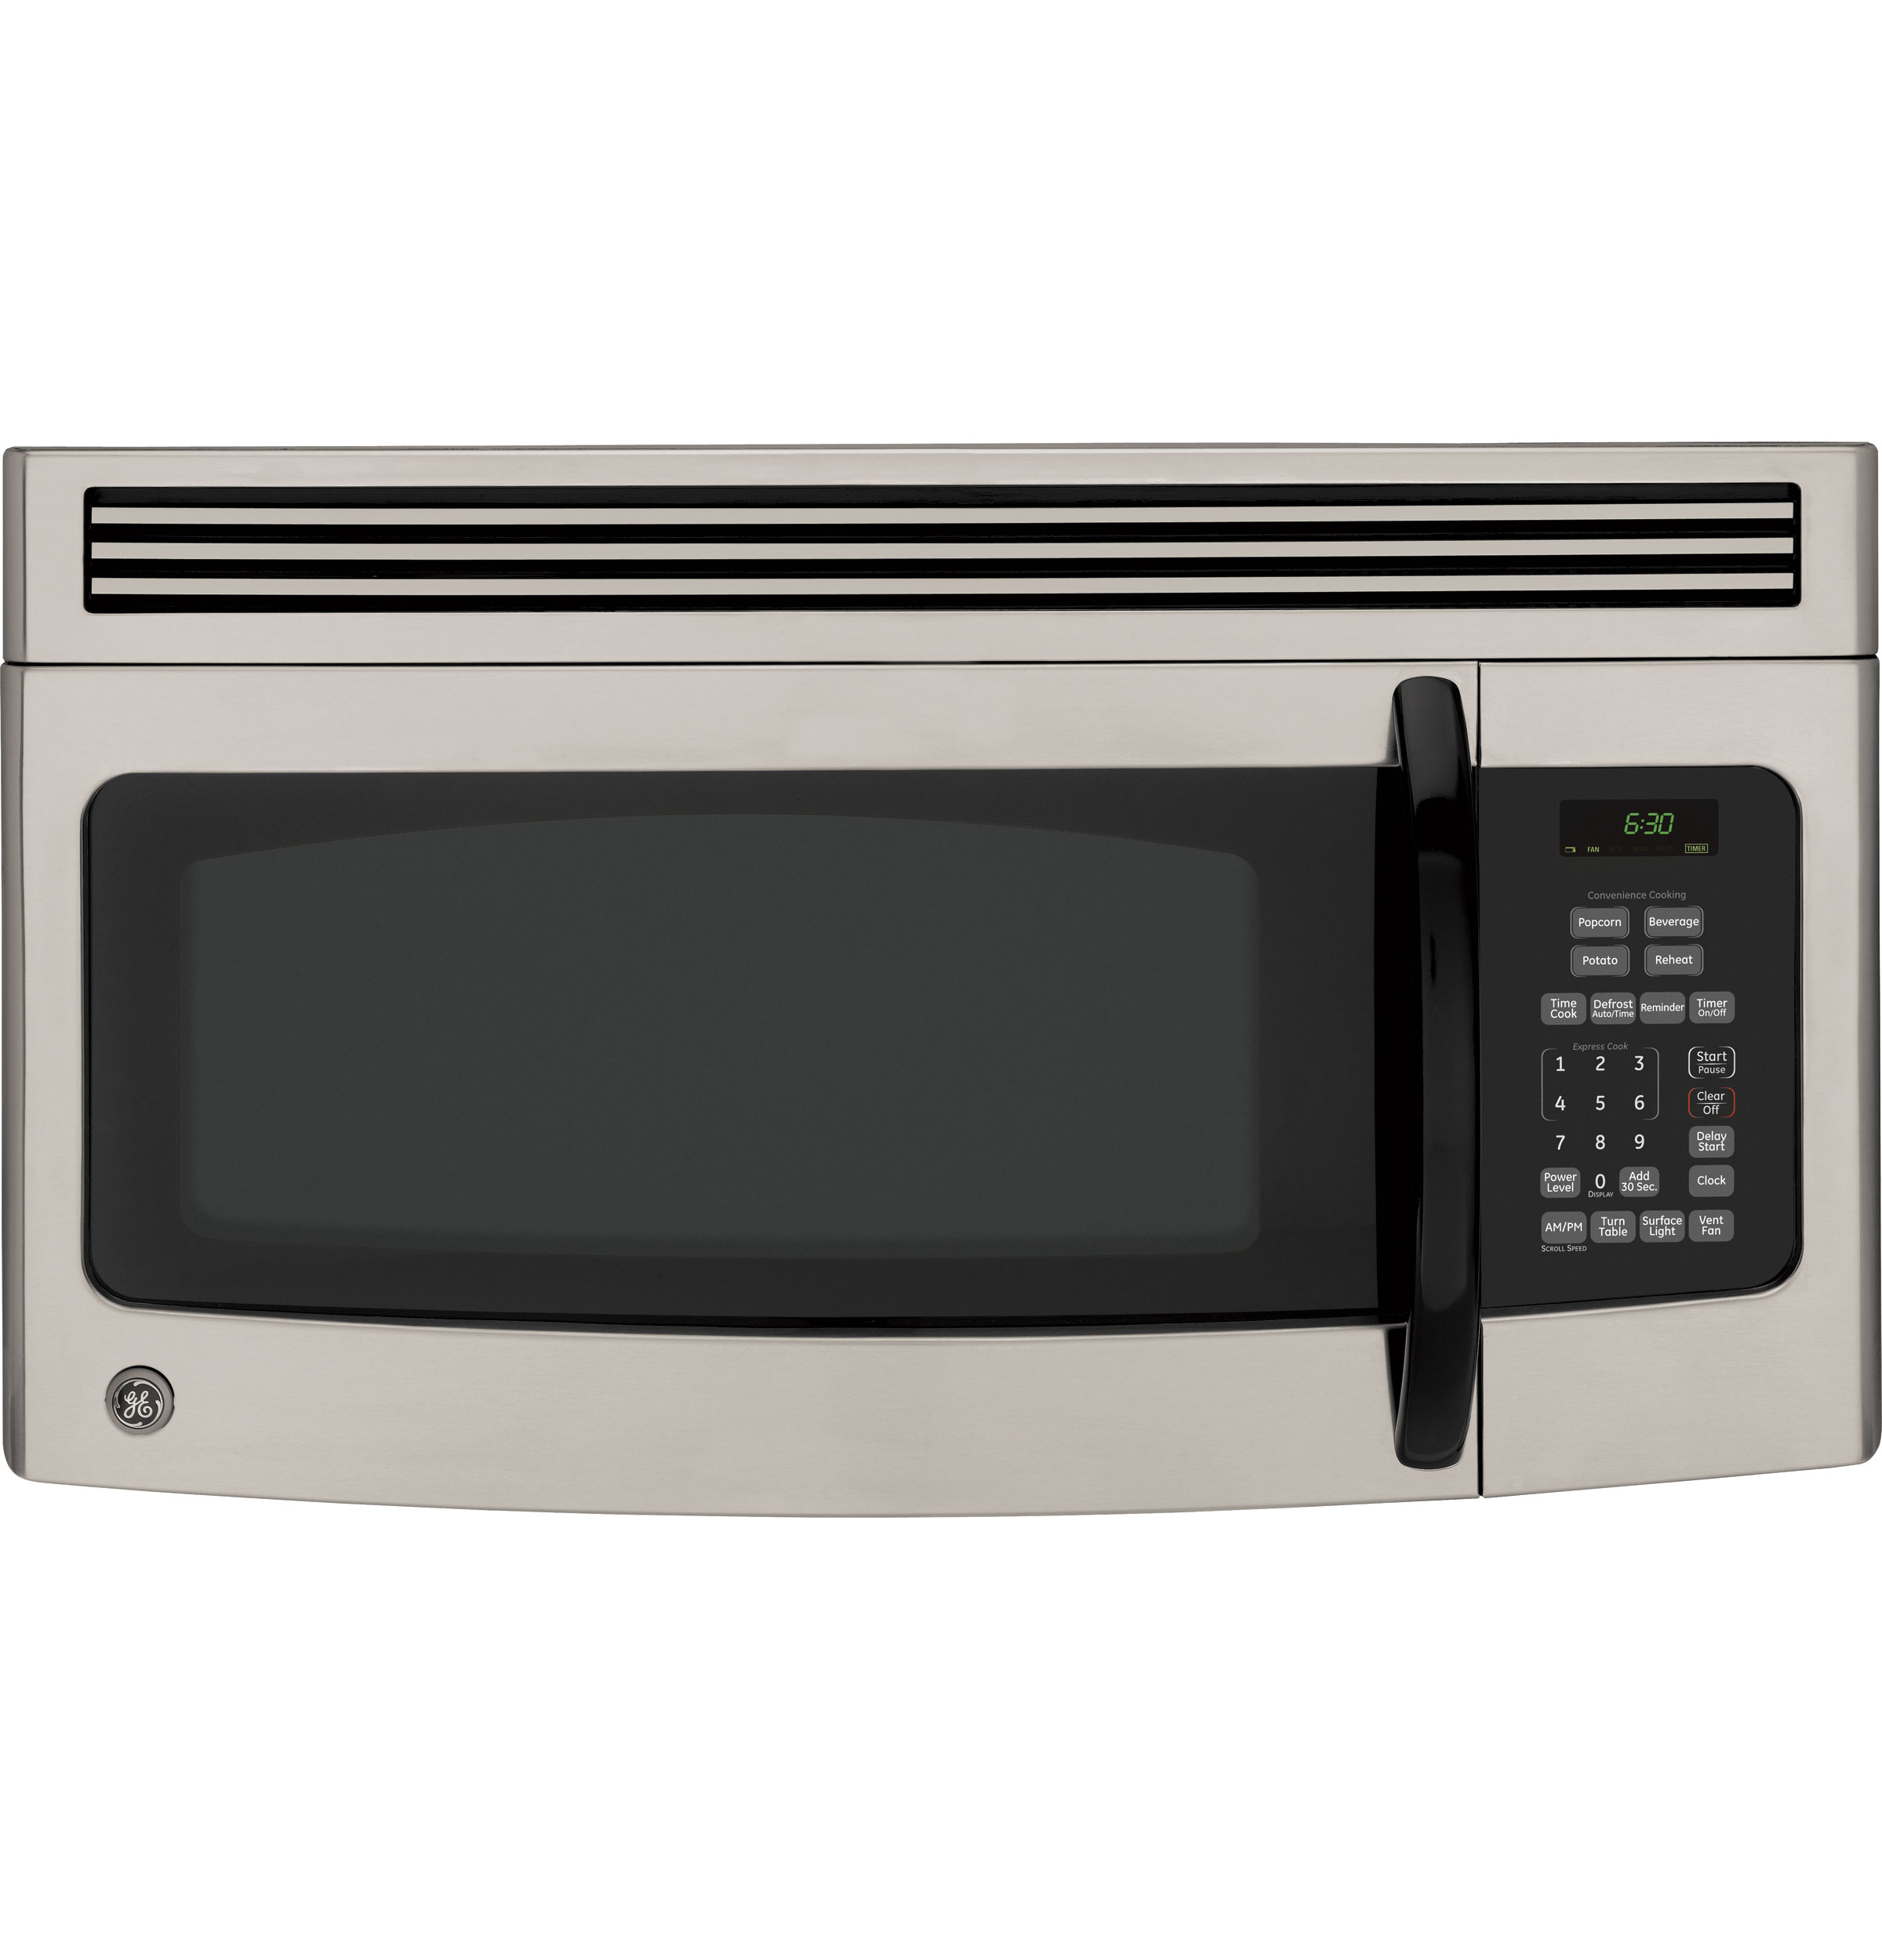 GE Spacemaker® 1.5 Cu. Ft. Over-the-Range Microwave Oven